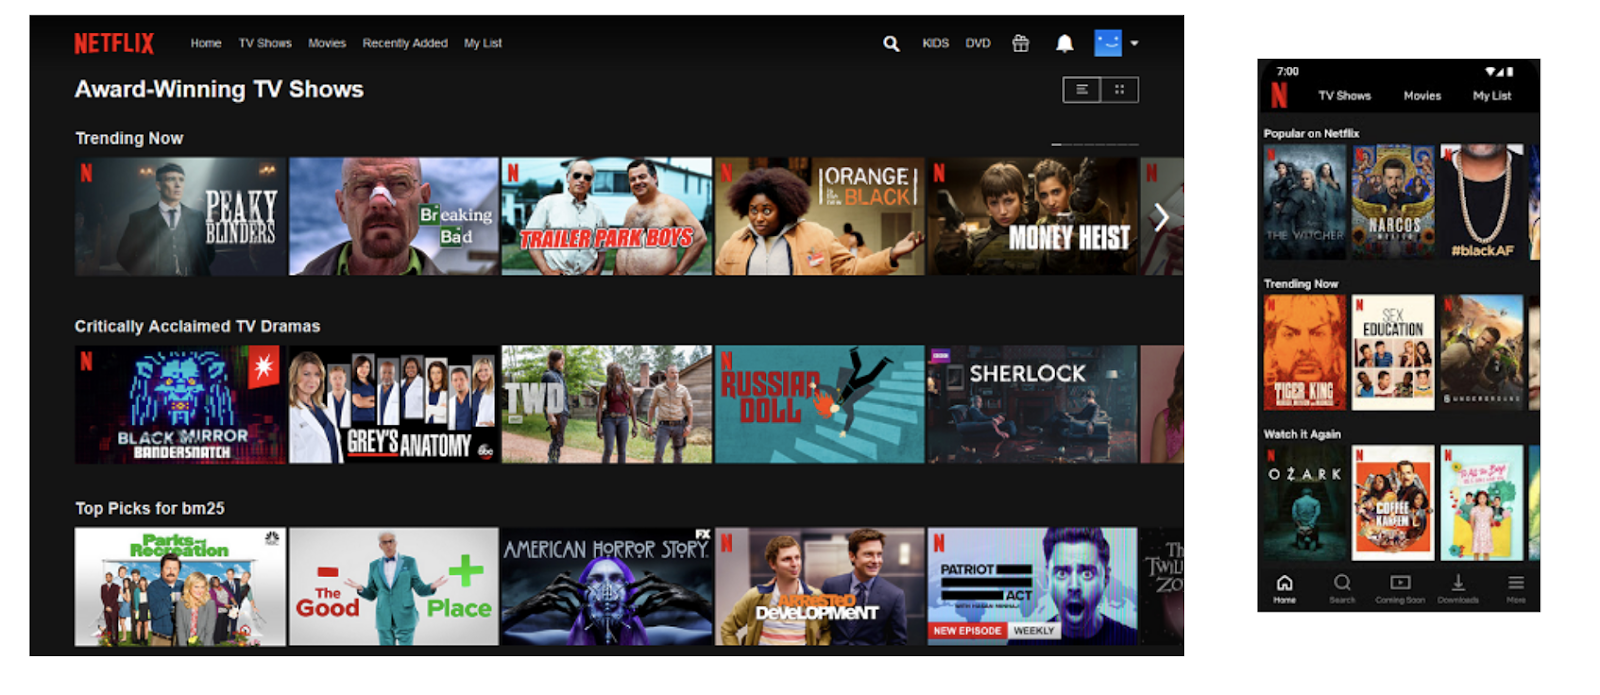 A screenshot of the Windows 10 Netflix app side-by-side with its iPhone app. Both interfaces use similar elements and design patterns.